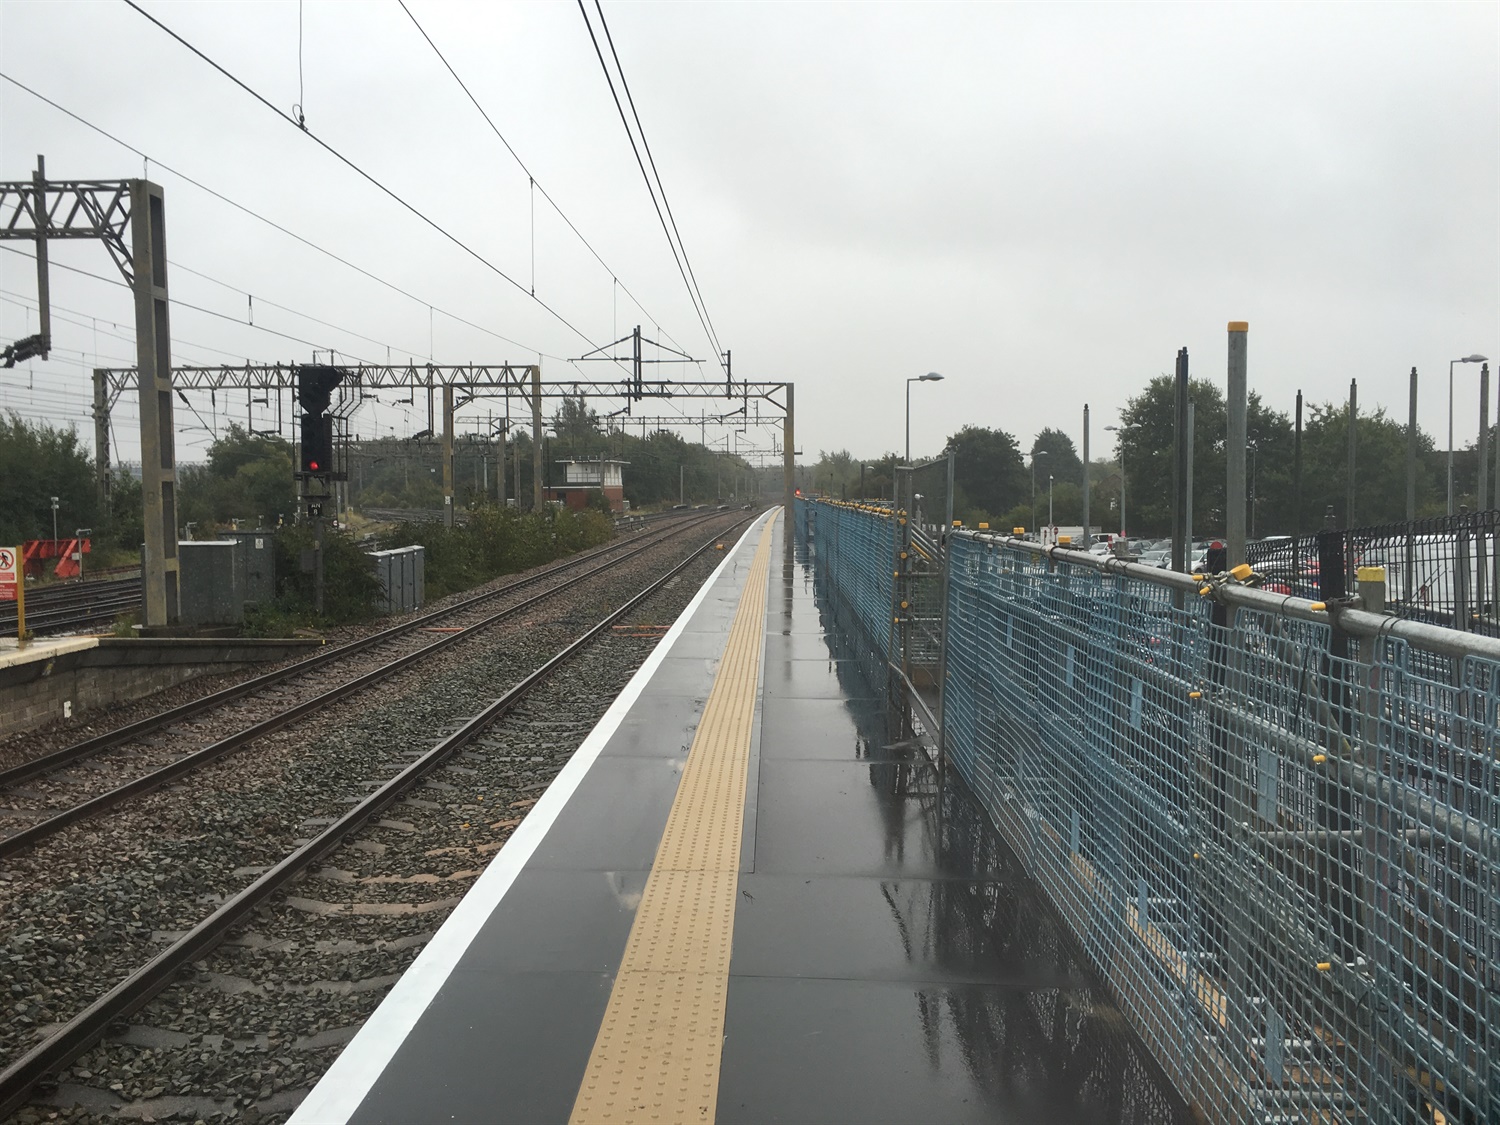 NR extends platform at Liverpool South Parkway ahead of Lime Street upgrade